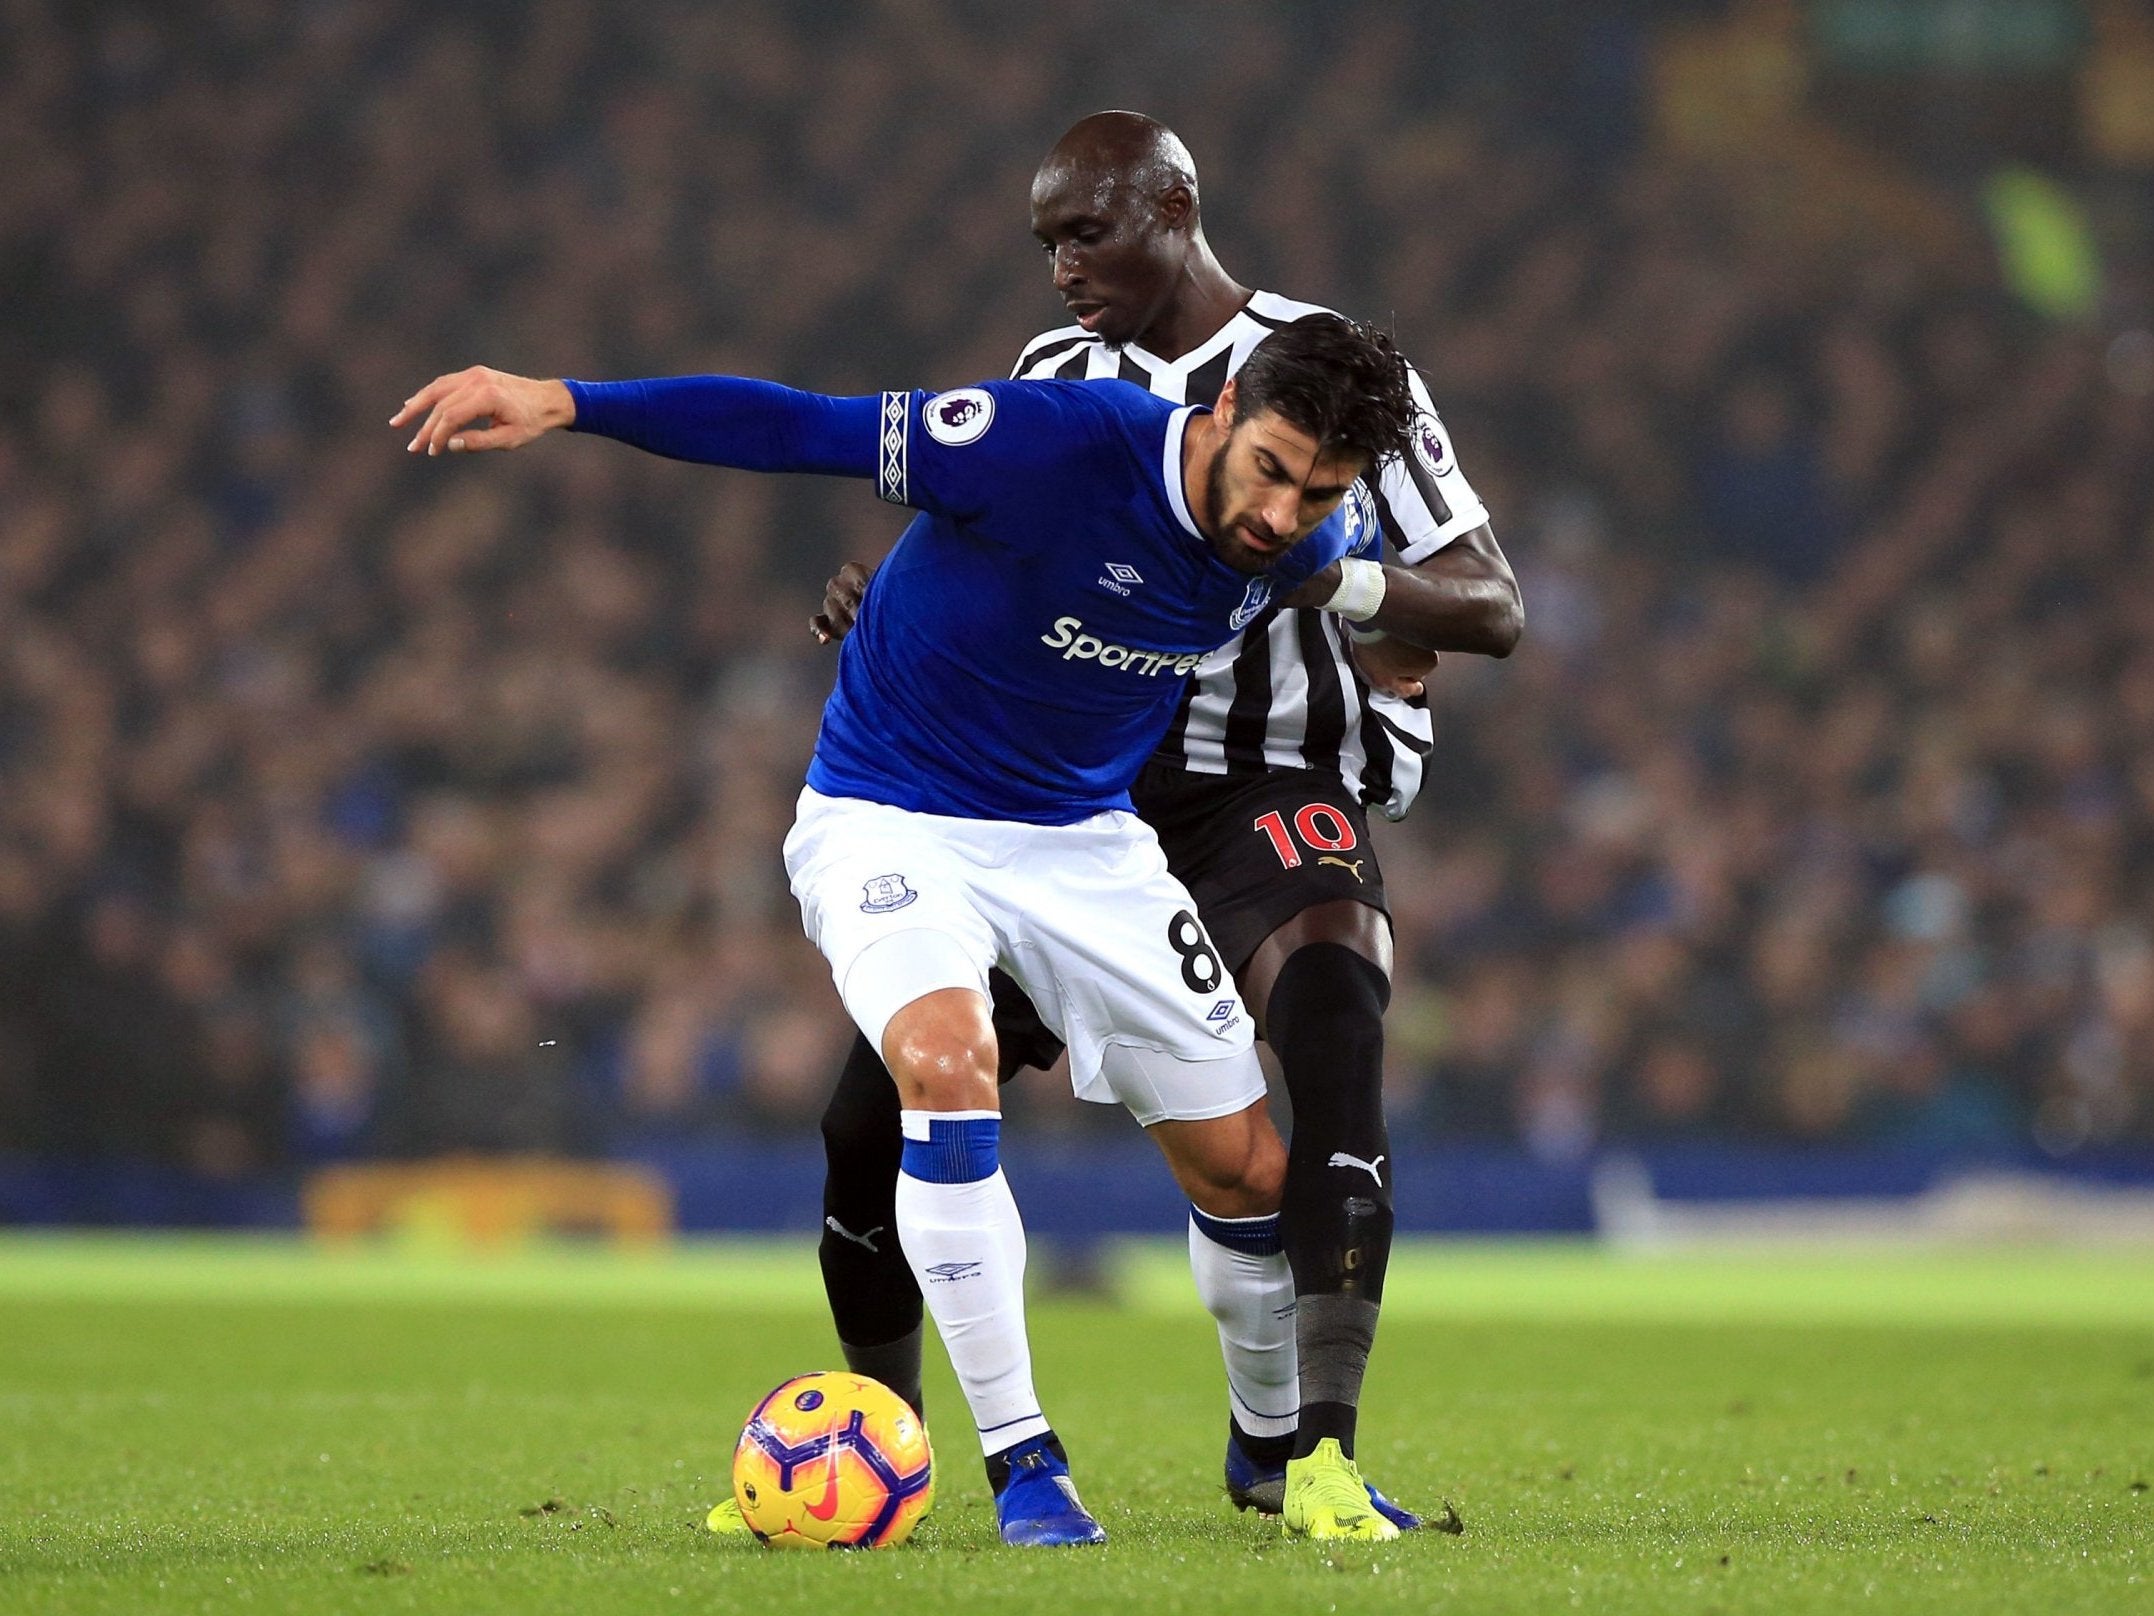 Andre Gomes has impressed at Everton